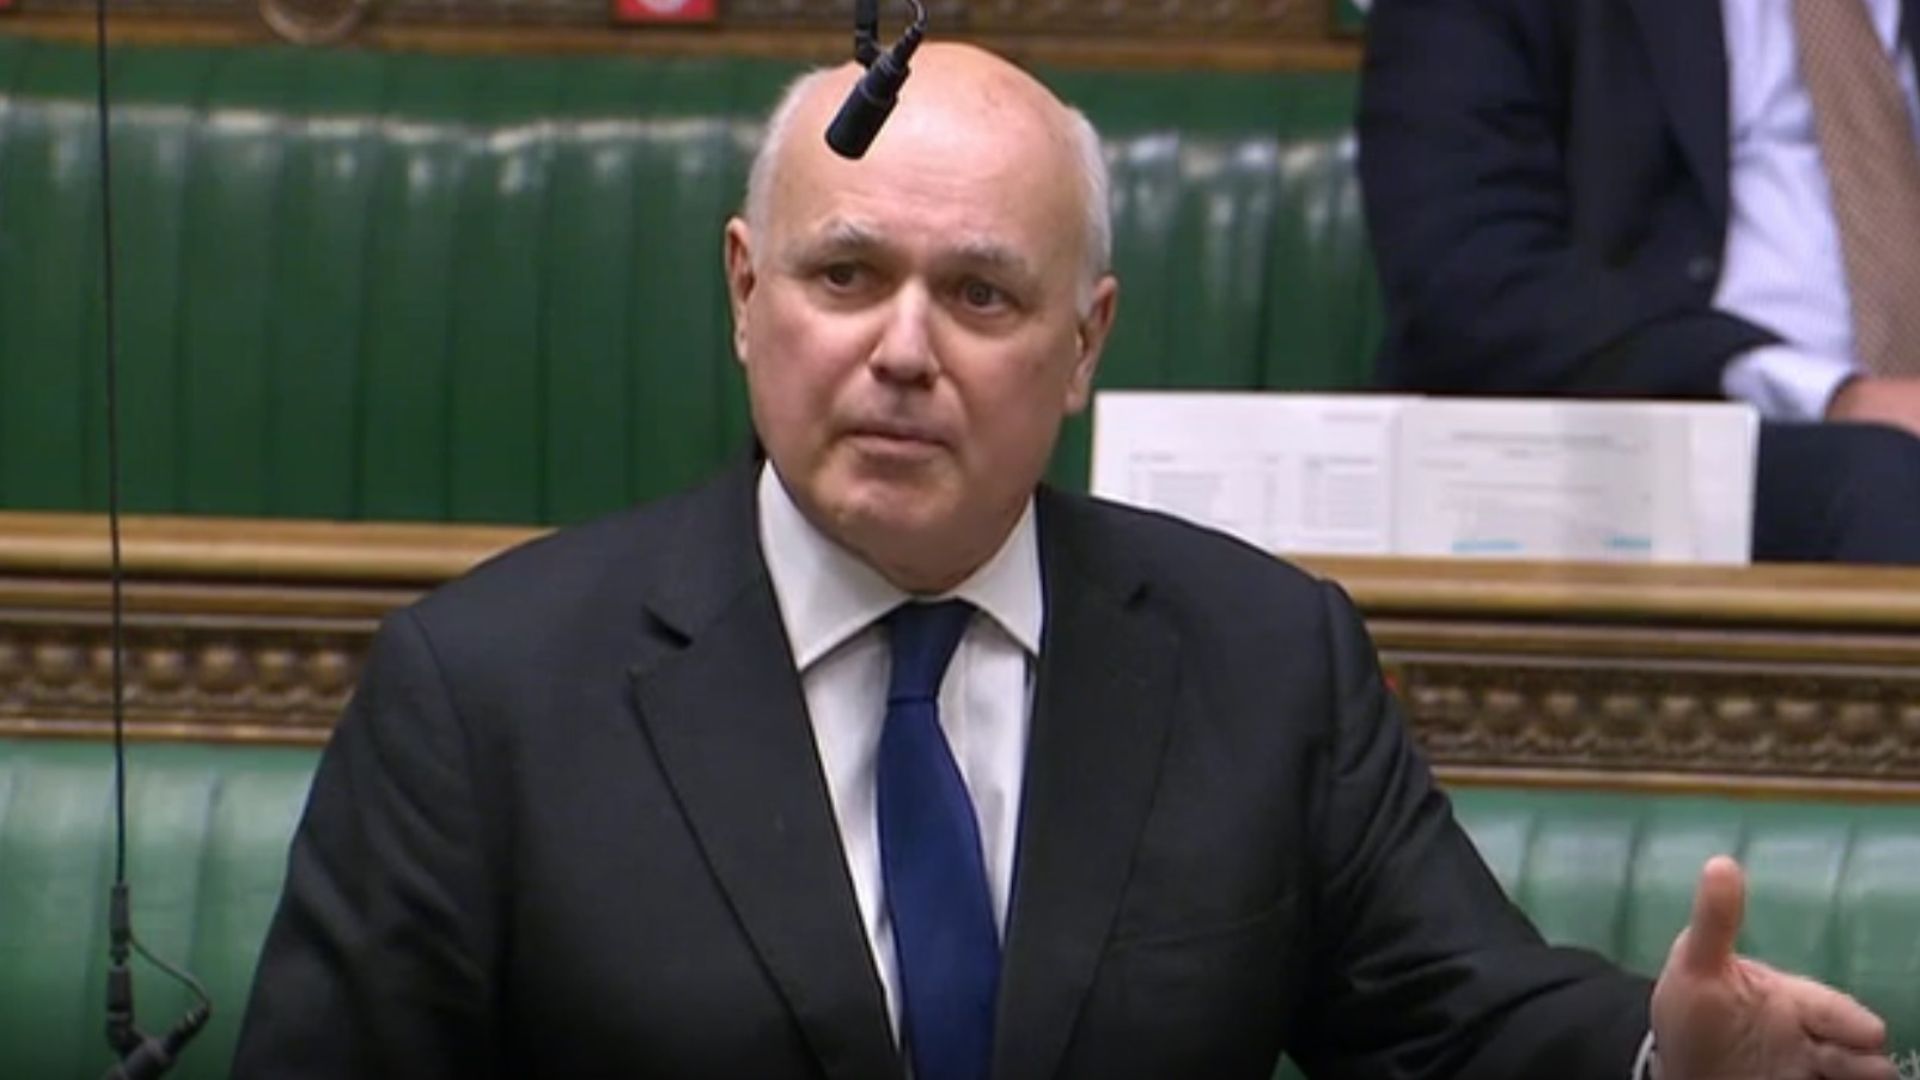 Iain Duncan Smith in the House of Commons - Credit: Parliament Live